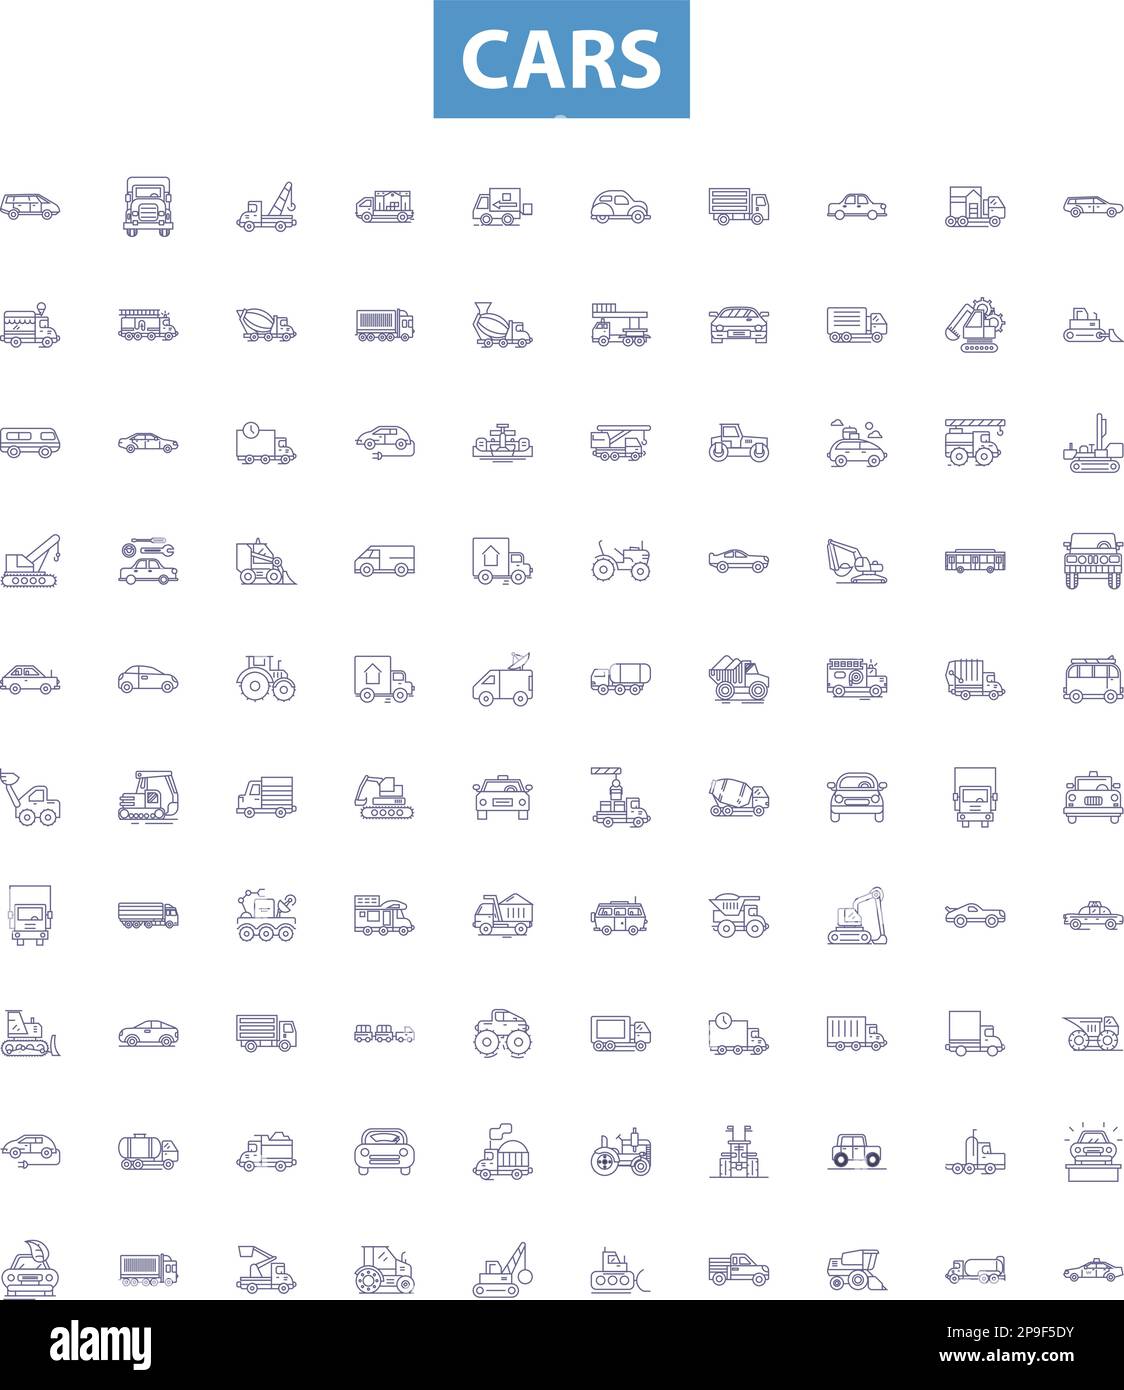 Cars line icons, signs set. Automobile, Sedan, SUV, Crossover, Hatchback, Convertible, Coupe, Hybrid, Truck outline vector illustrations. Stock Vector